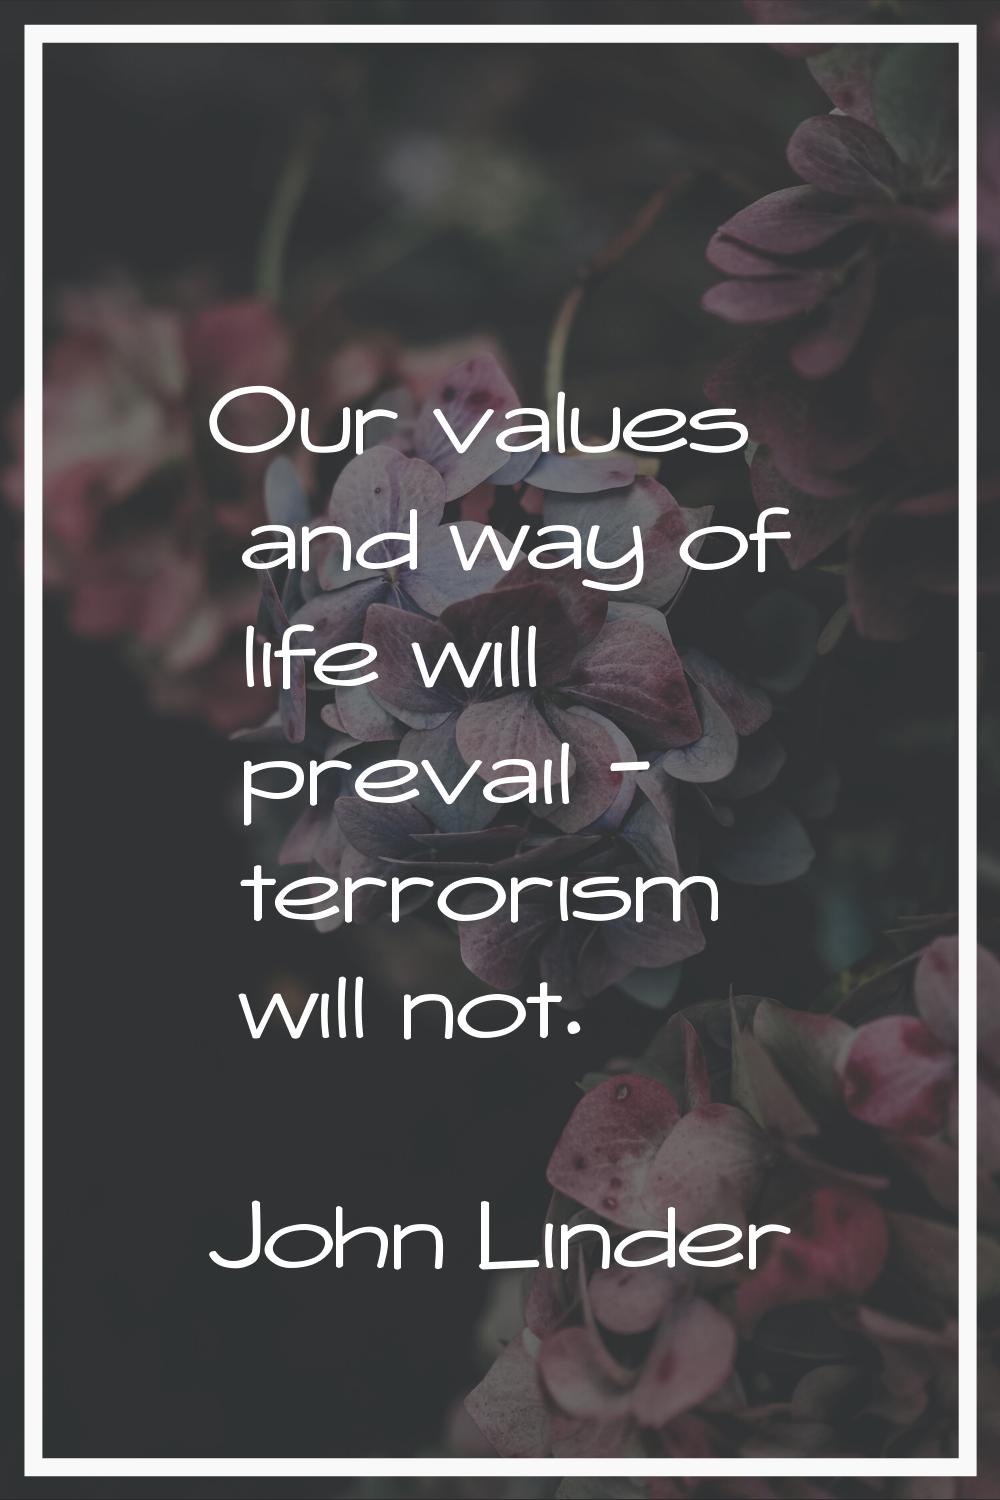 Our values and way of life will prevail - terrorism will not.